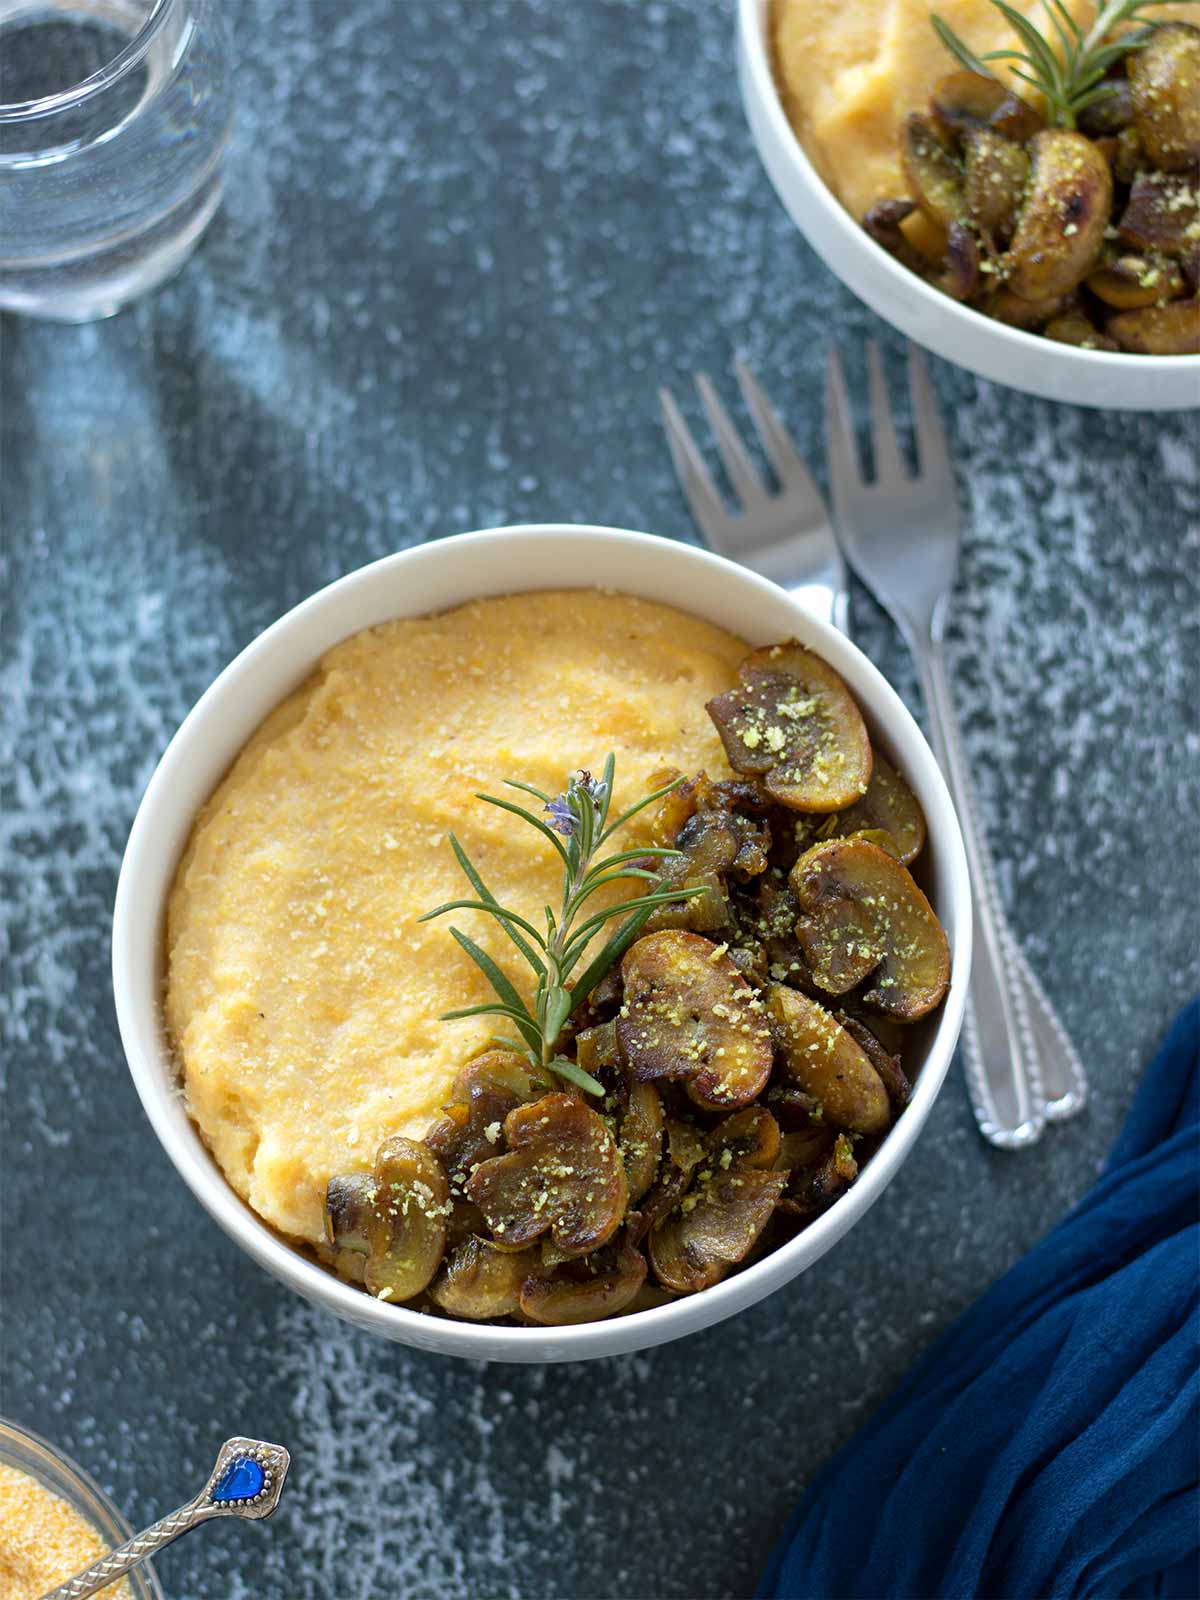 Creamy mushroom polenta in a bowl garnished with fresh rosemary with forks and a glass of water